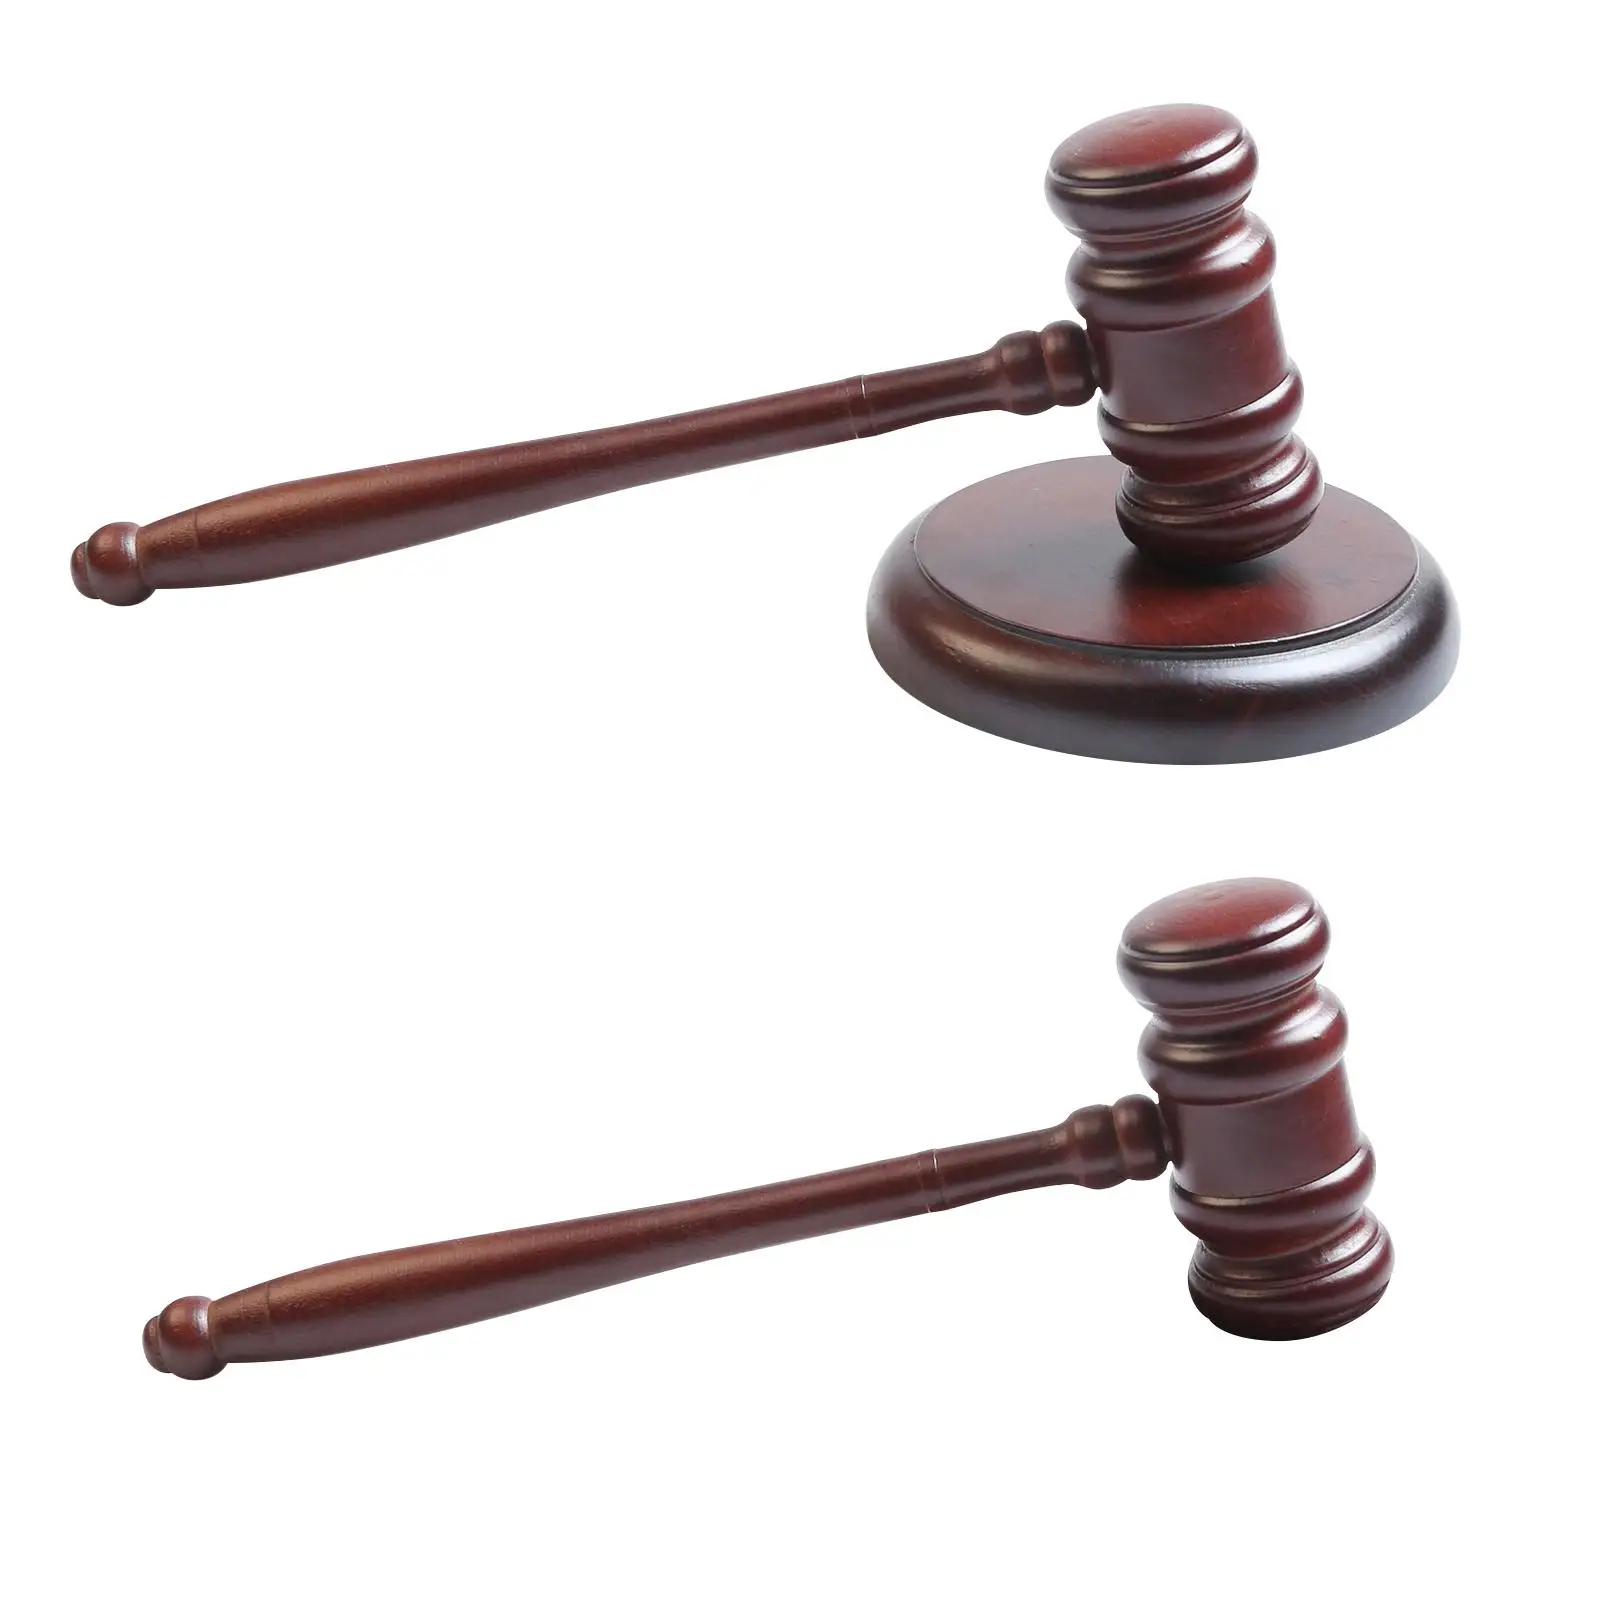 Wooden Gavel Prop Costume Gift Cosplay Props Toy Wooden Gavel for Justice Lawyer Auction Court Student Judge